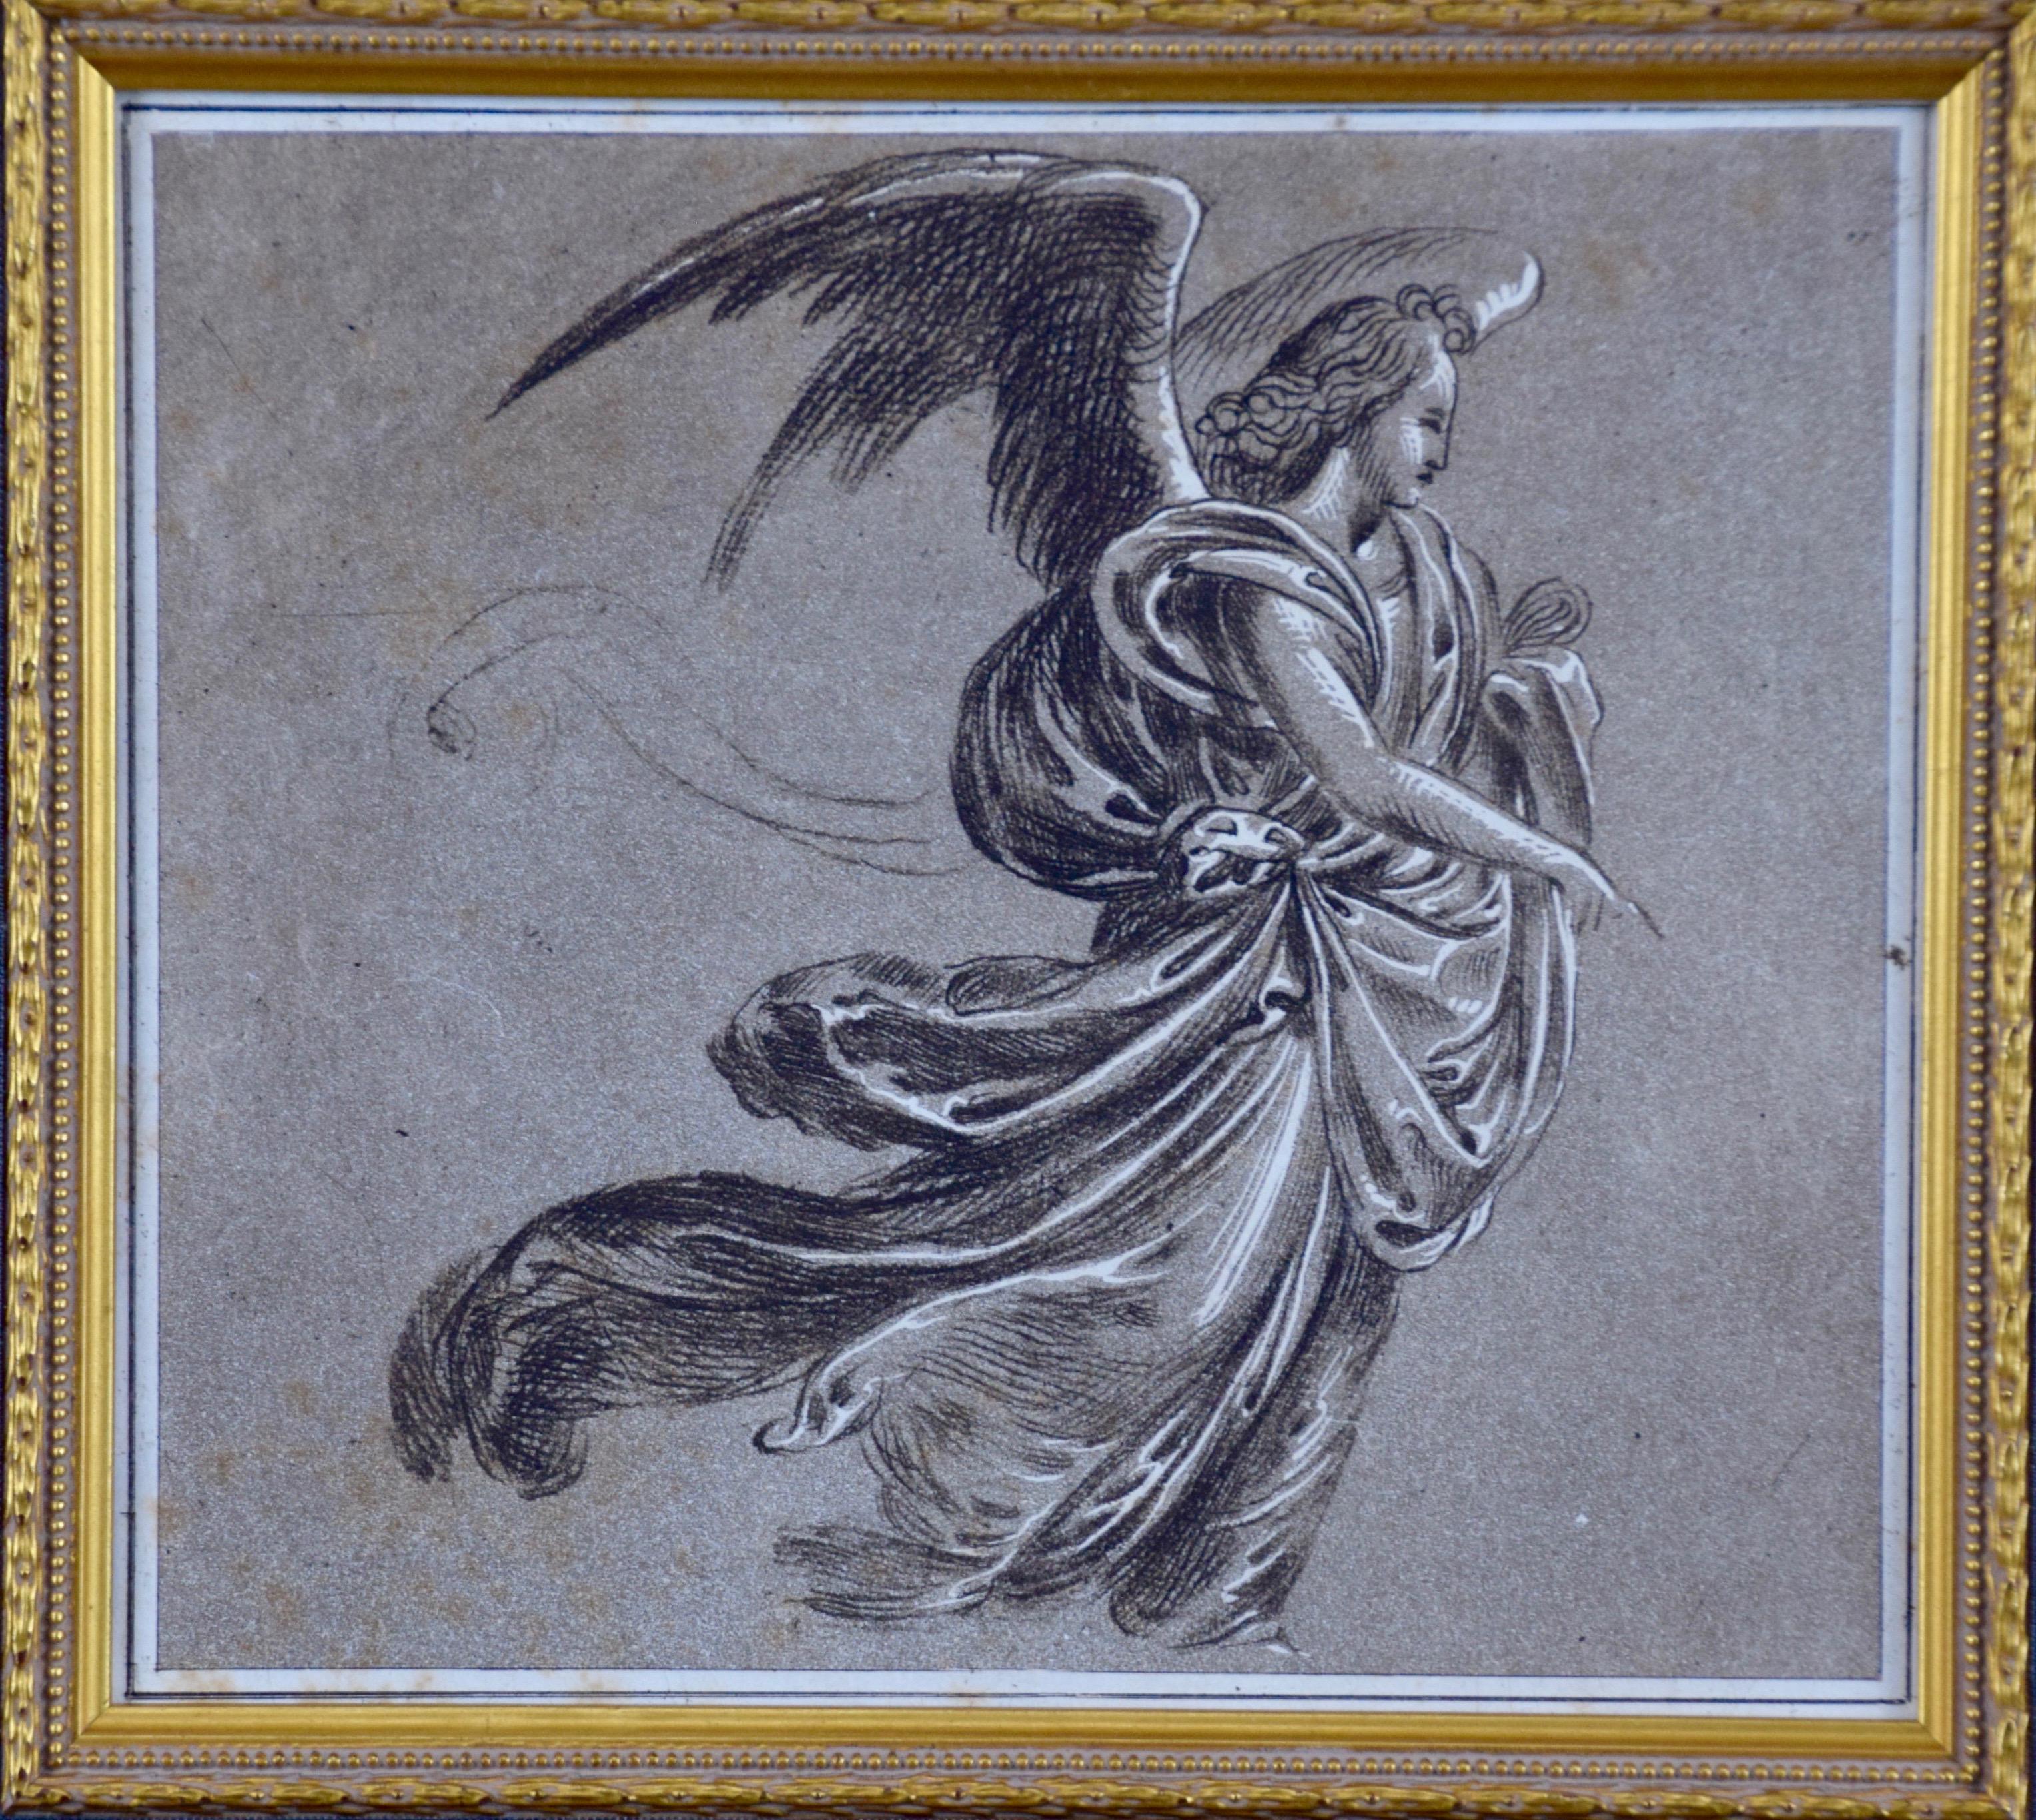 Engraving of an Angel on the Move with Wings and Flowing Robes - Print by Unknown